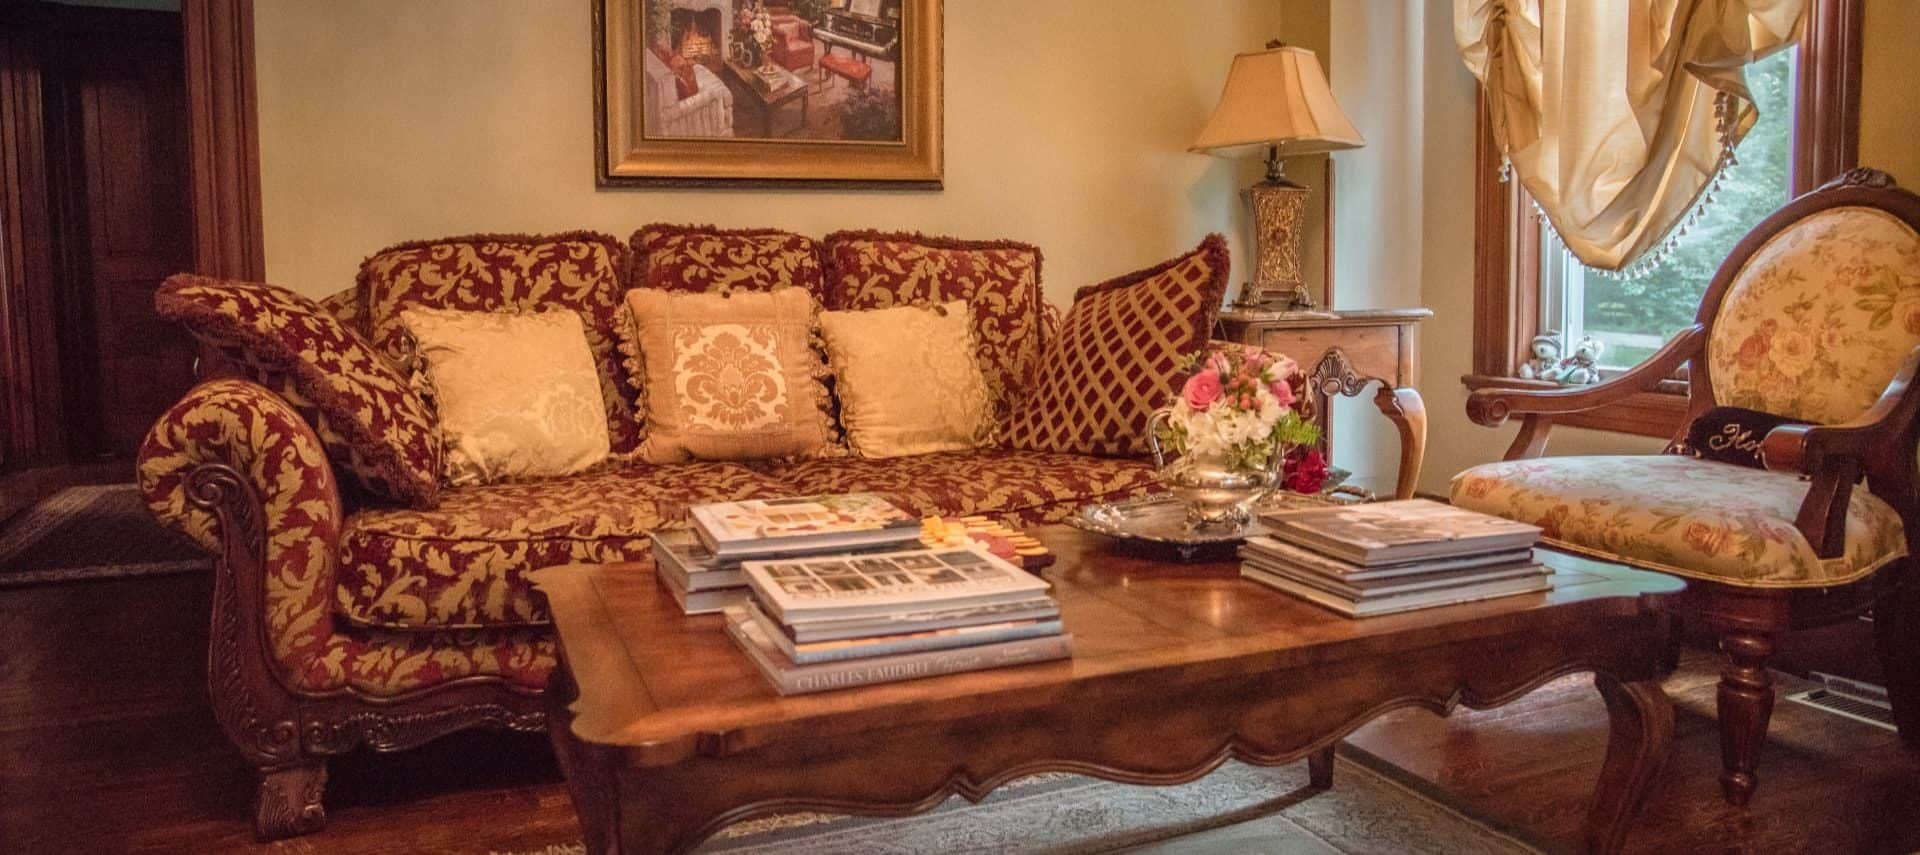 Victorian sofa and chair with upholstered cushions and wooden frame and wooden coffee table with books